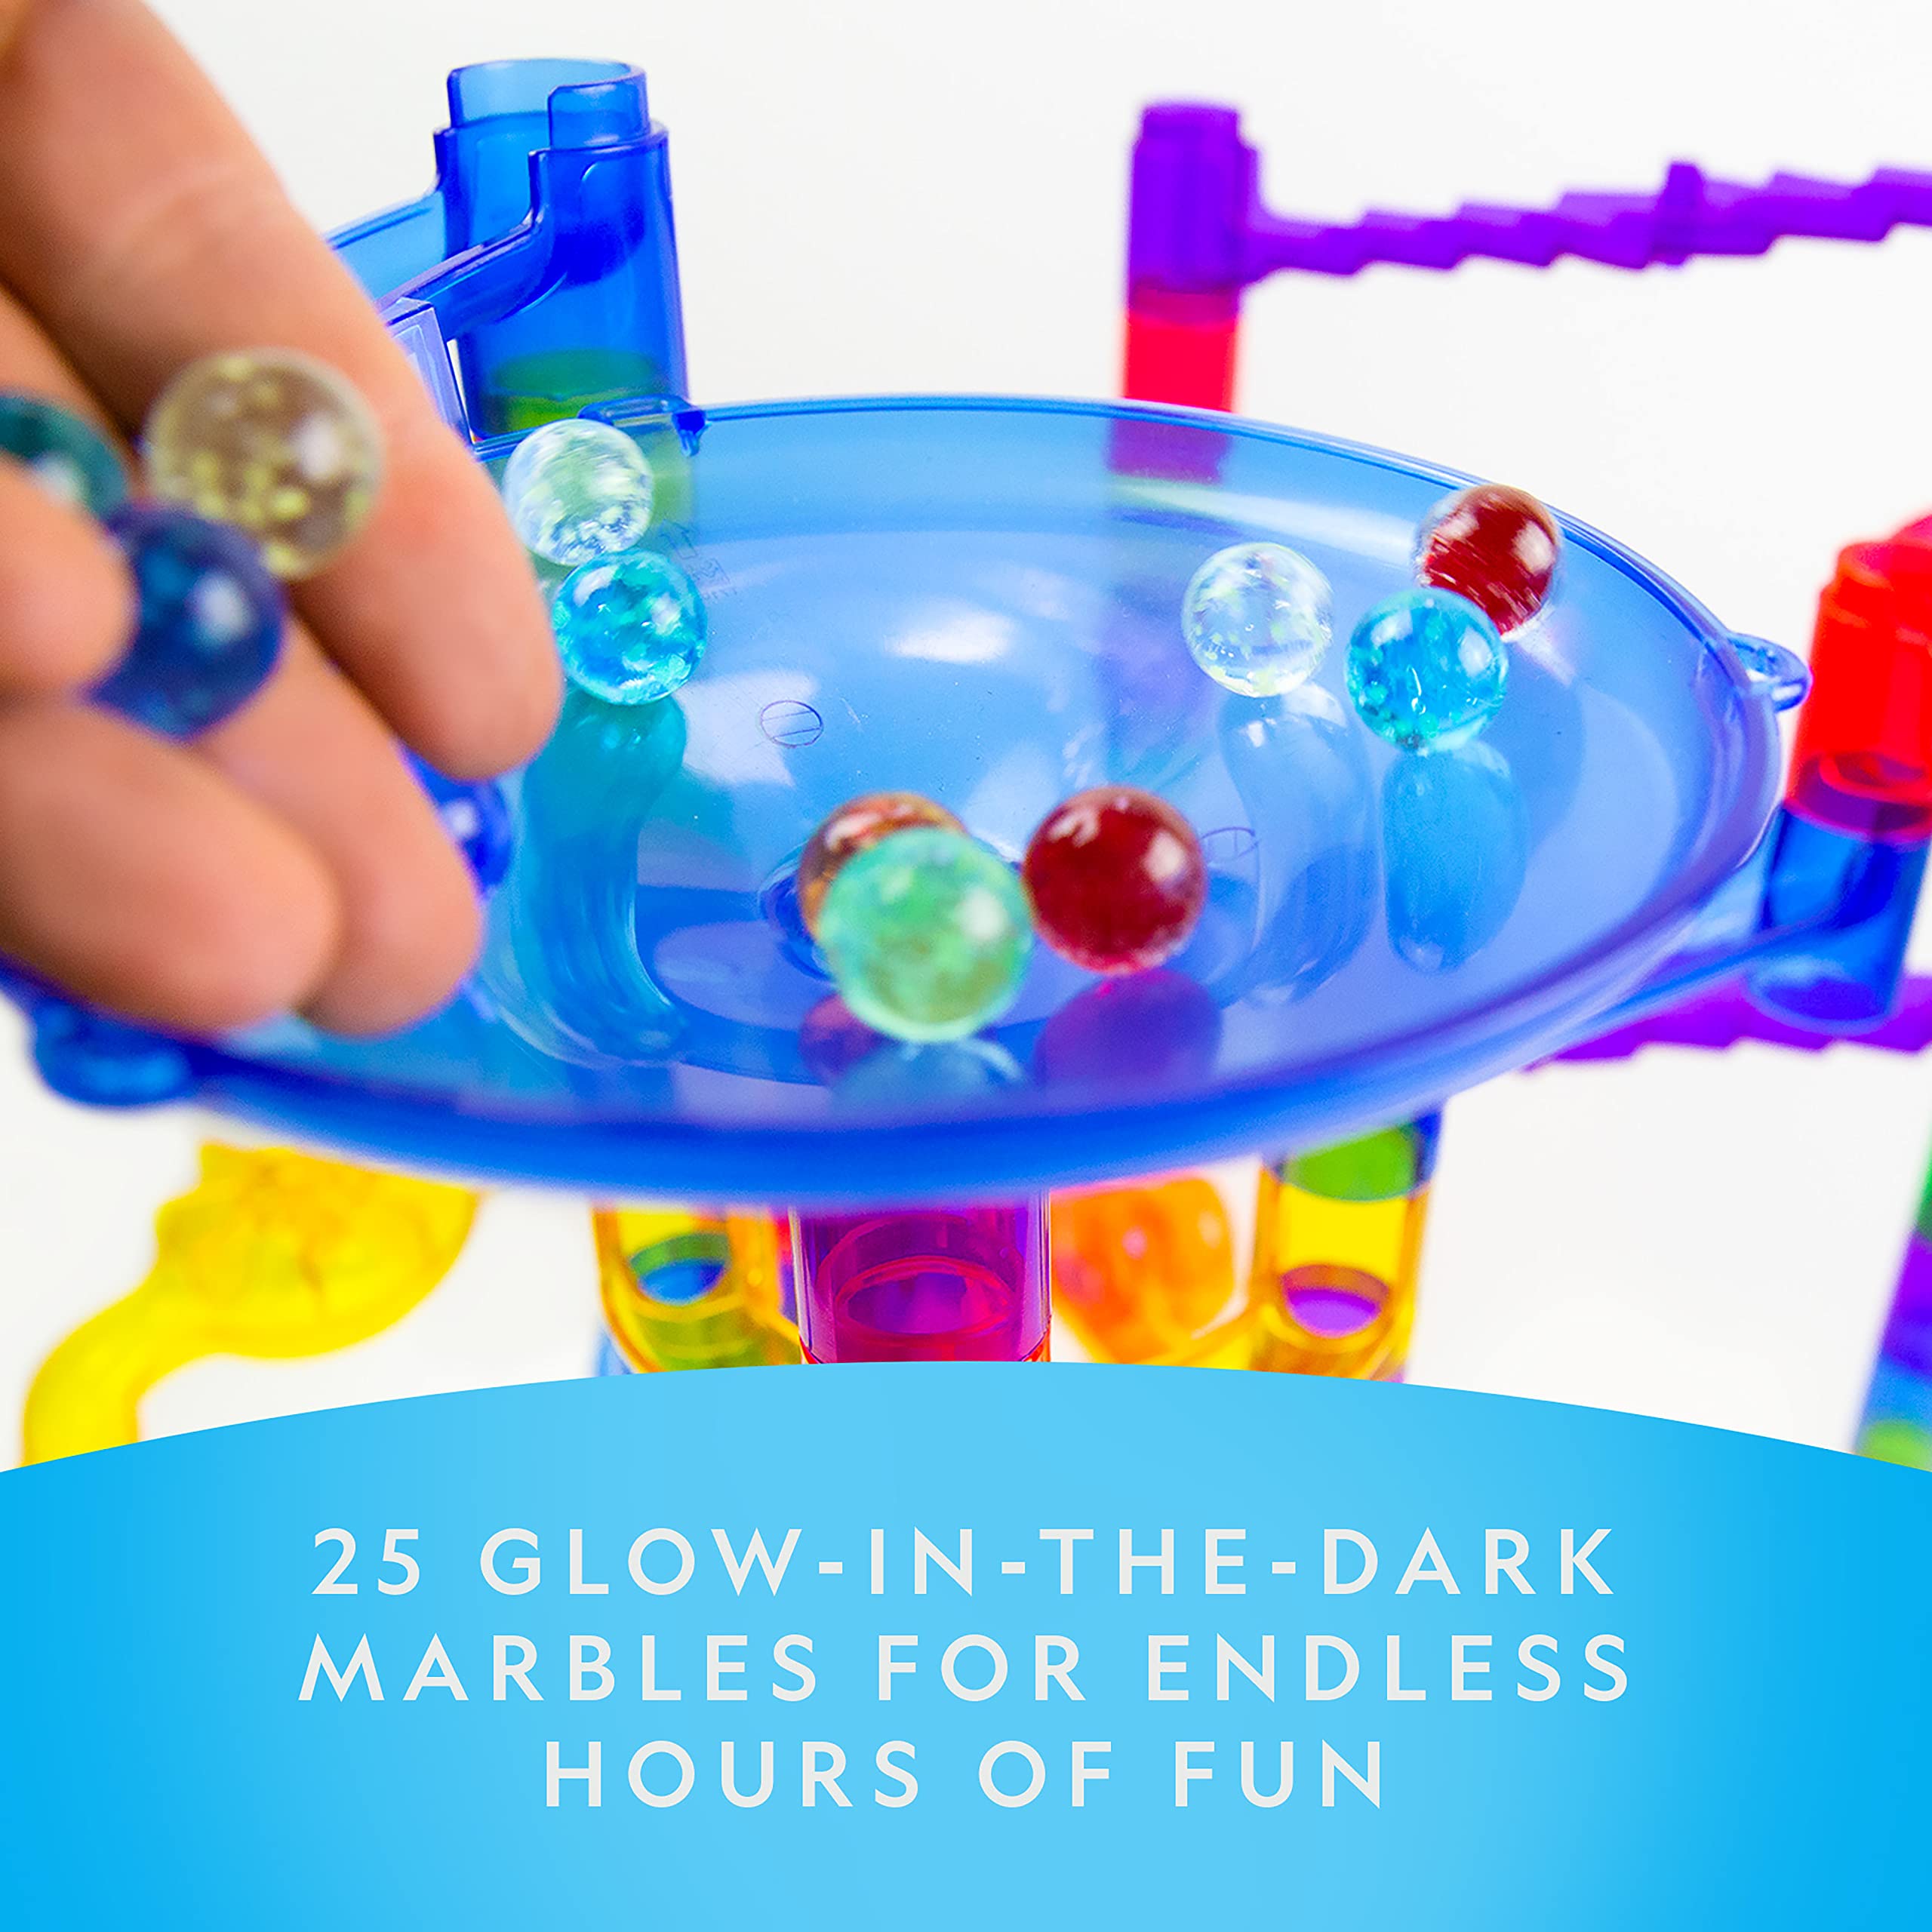 NATIONAL GEOGRAPHIC Glow in The Dark Marbles Refill – 25 Glass Marbles That Glow in The Dark, Includes Storage Pouch & UV Light, Marble Runs for Kids, Building Toys, Science Toys